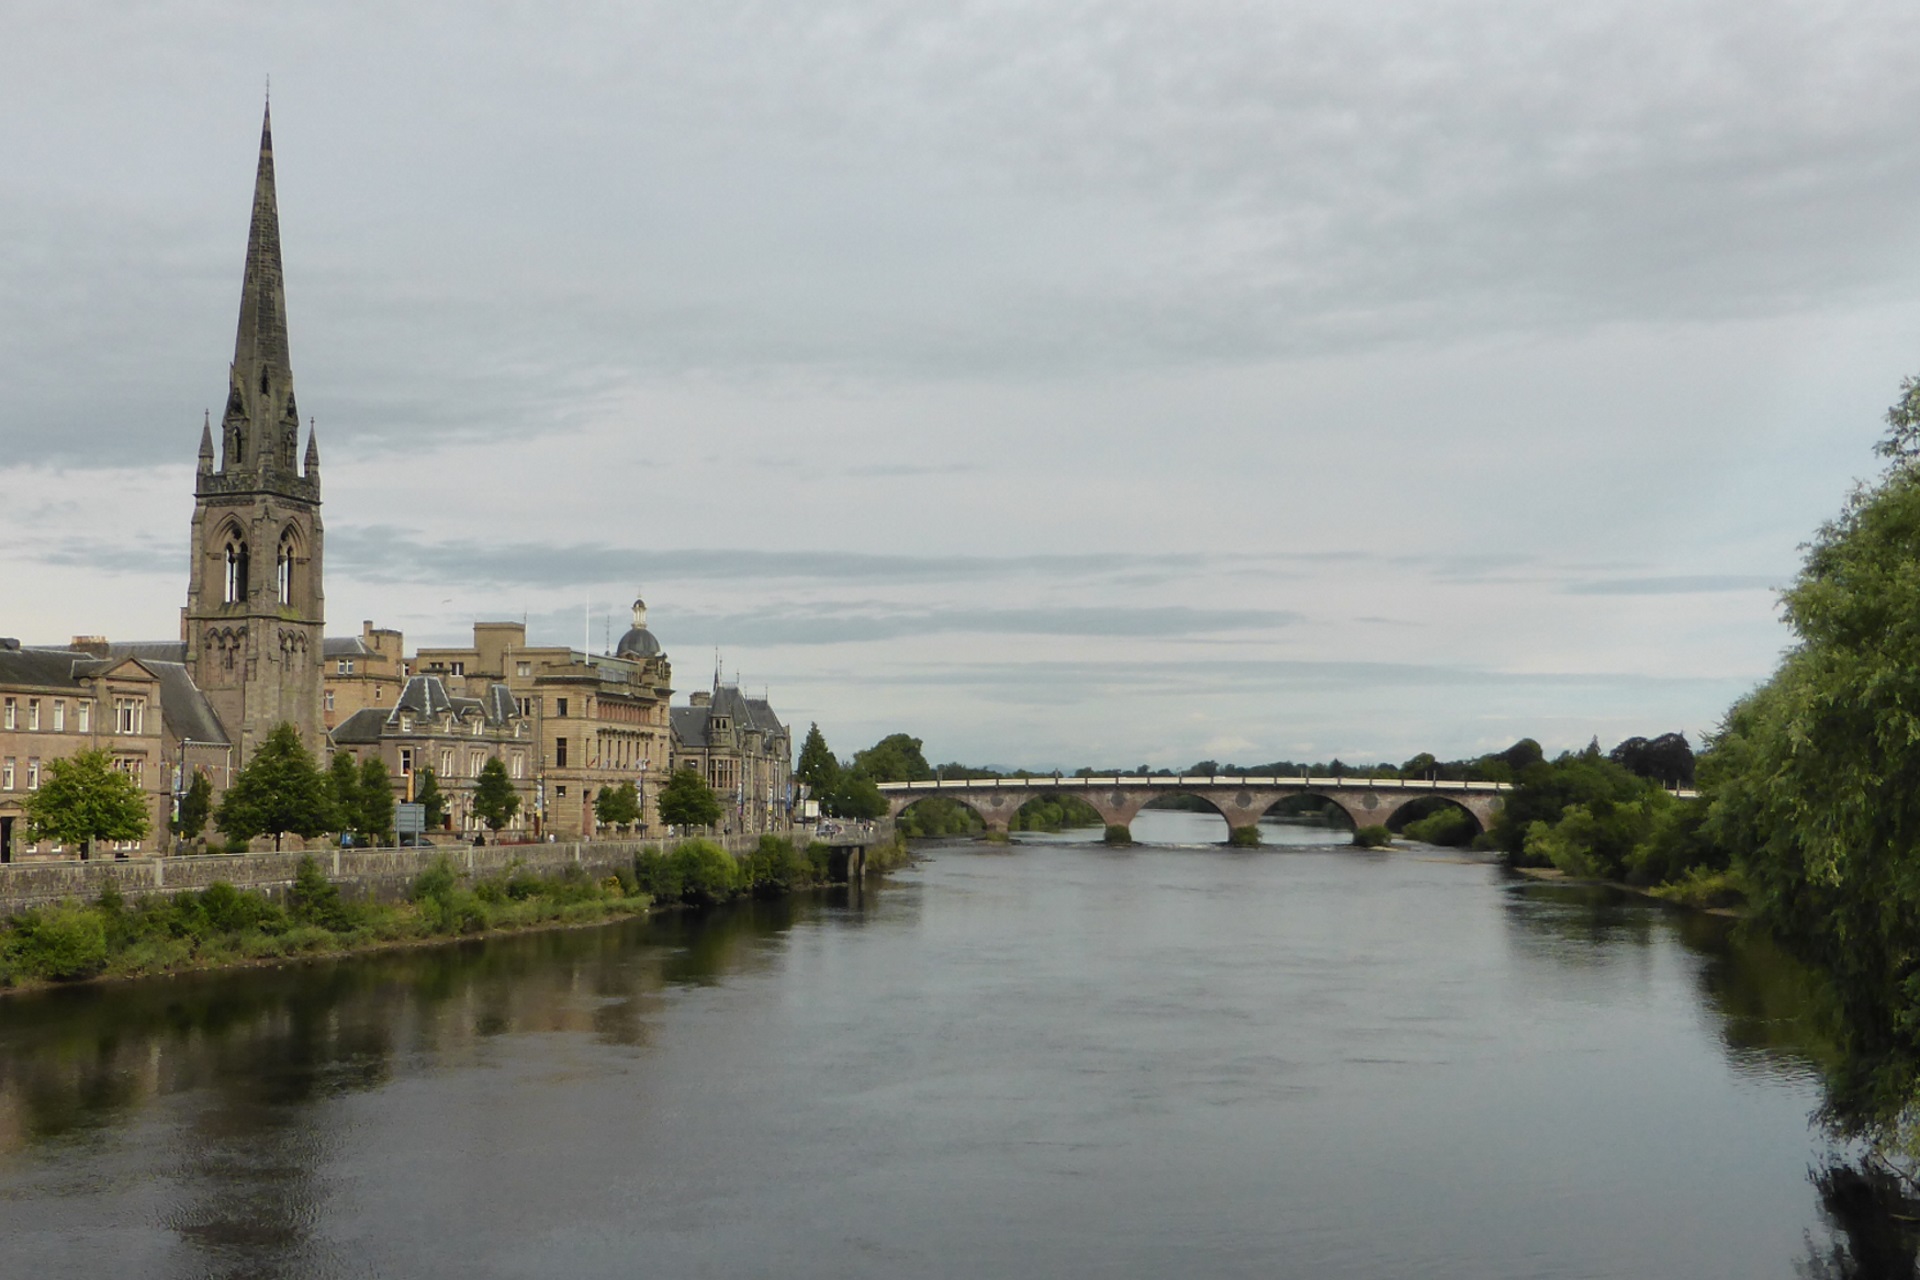 Perth across the Tay